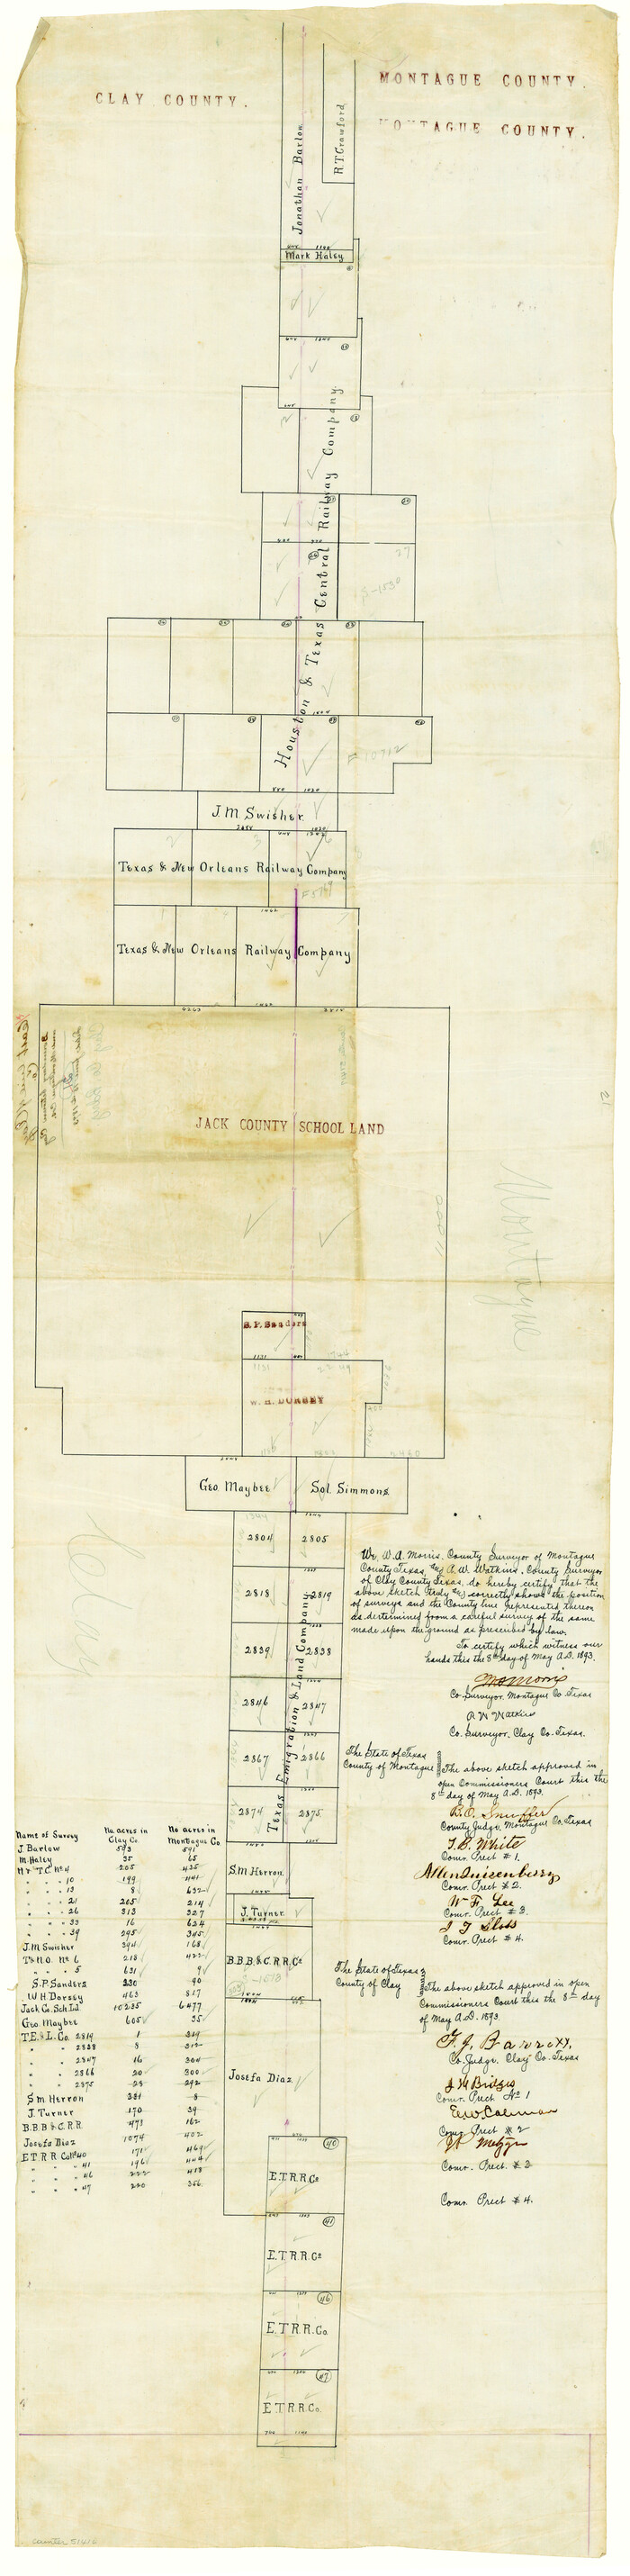 51416, Clay County Boundary File 14, General Map Collection